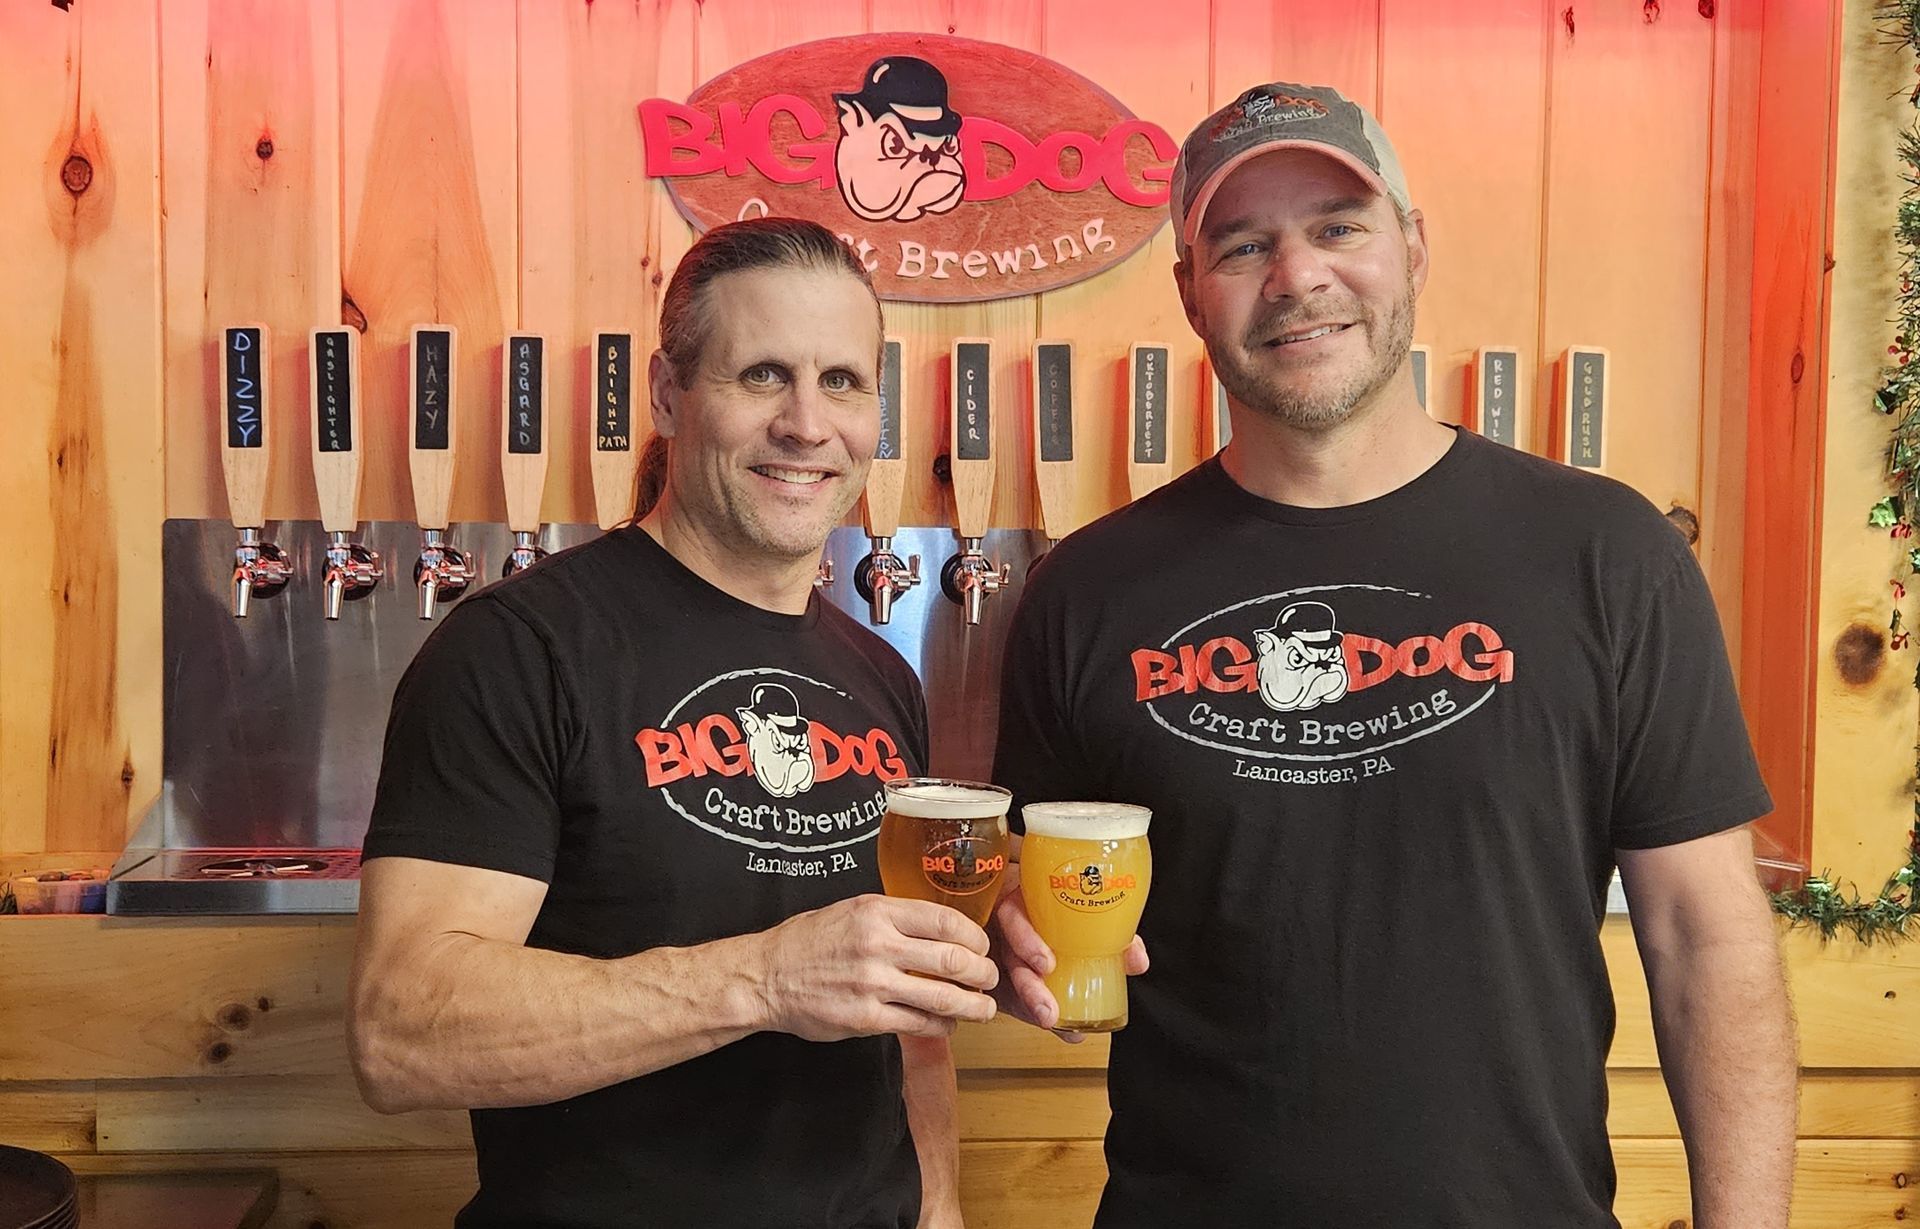 Mark And Dean, The Owners Of Big Dog Craft Brewing